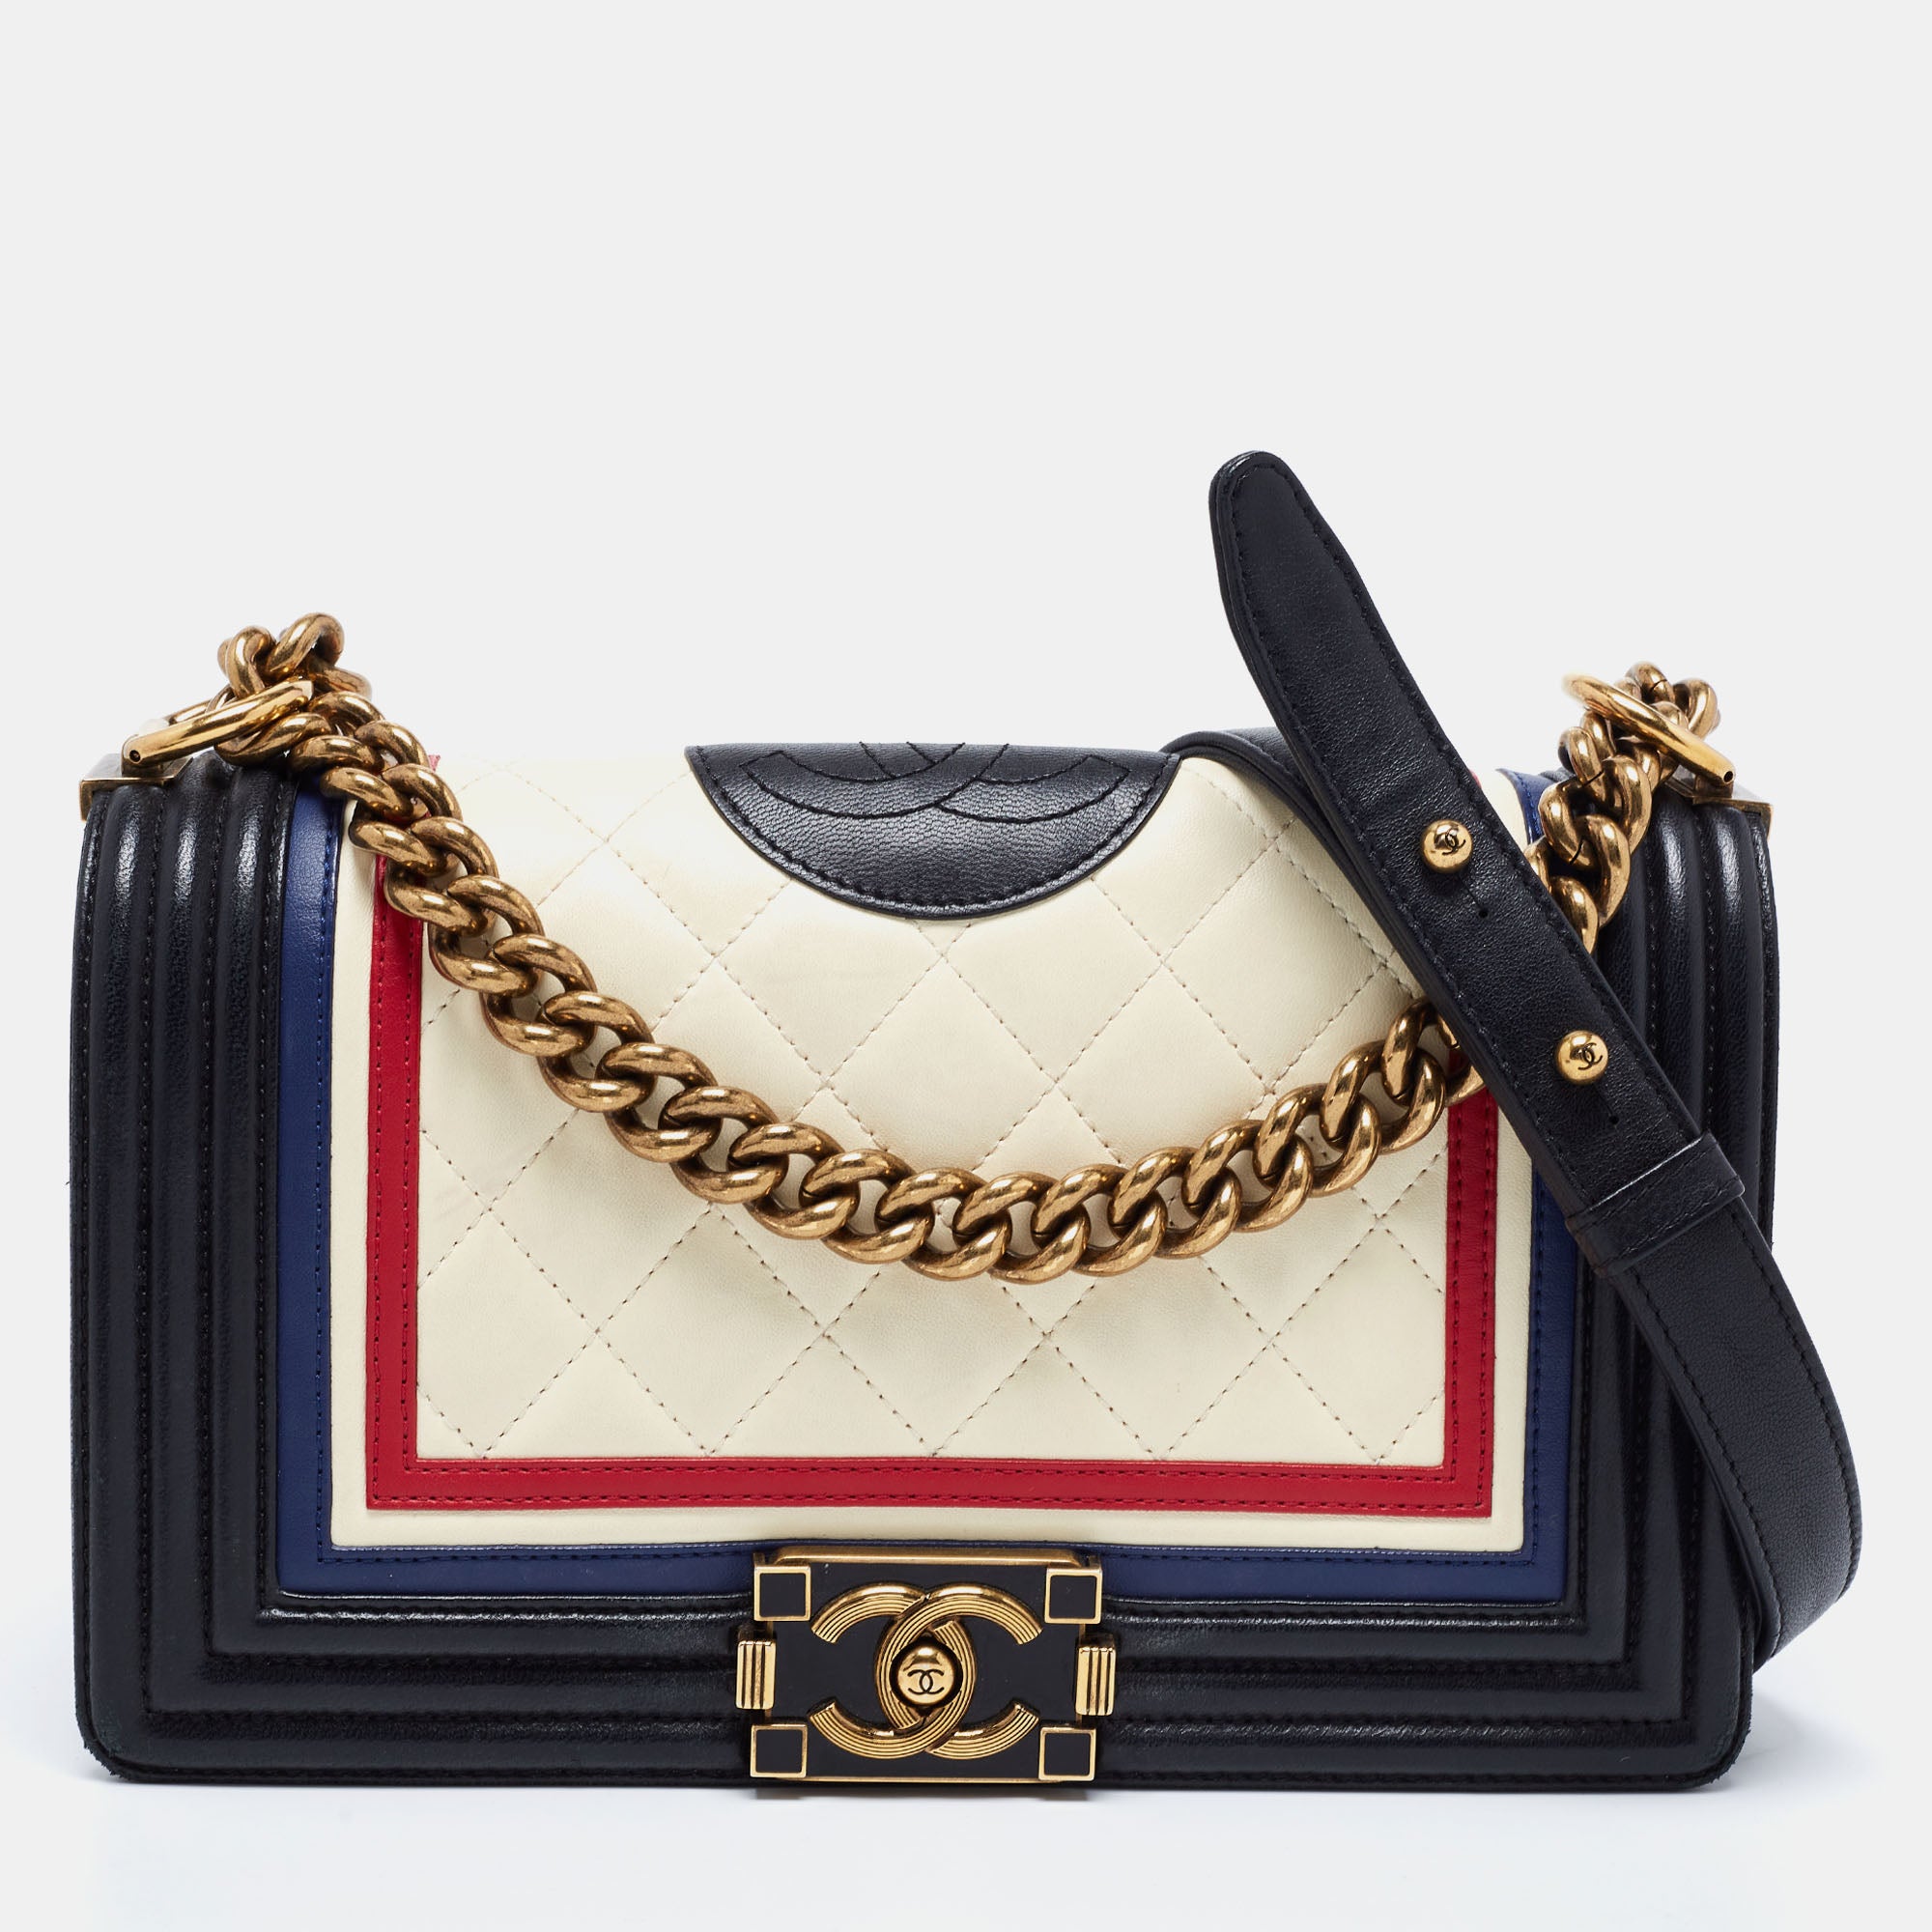 Chanel Multicolor Quilted Leather Medium Boy Flap Bag